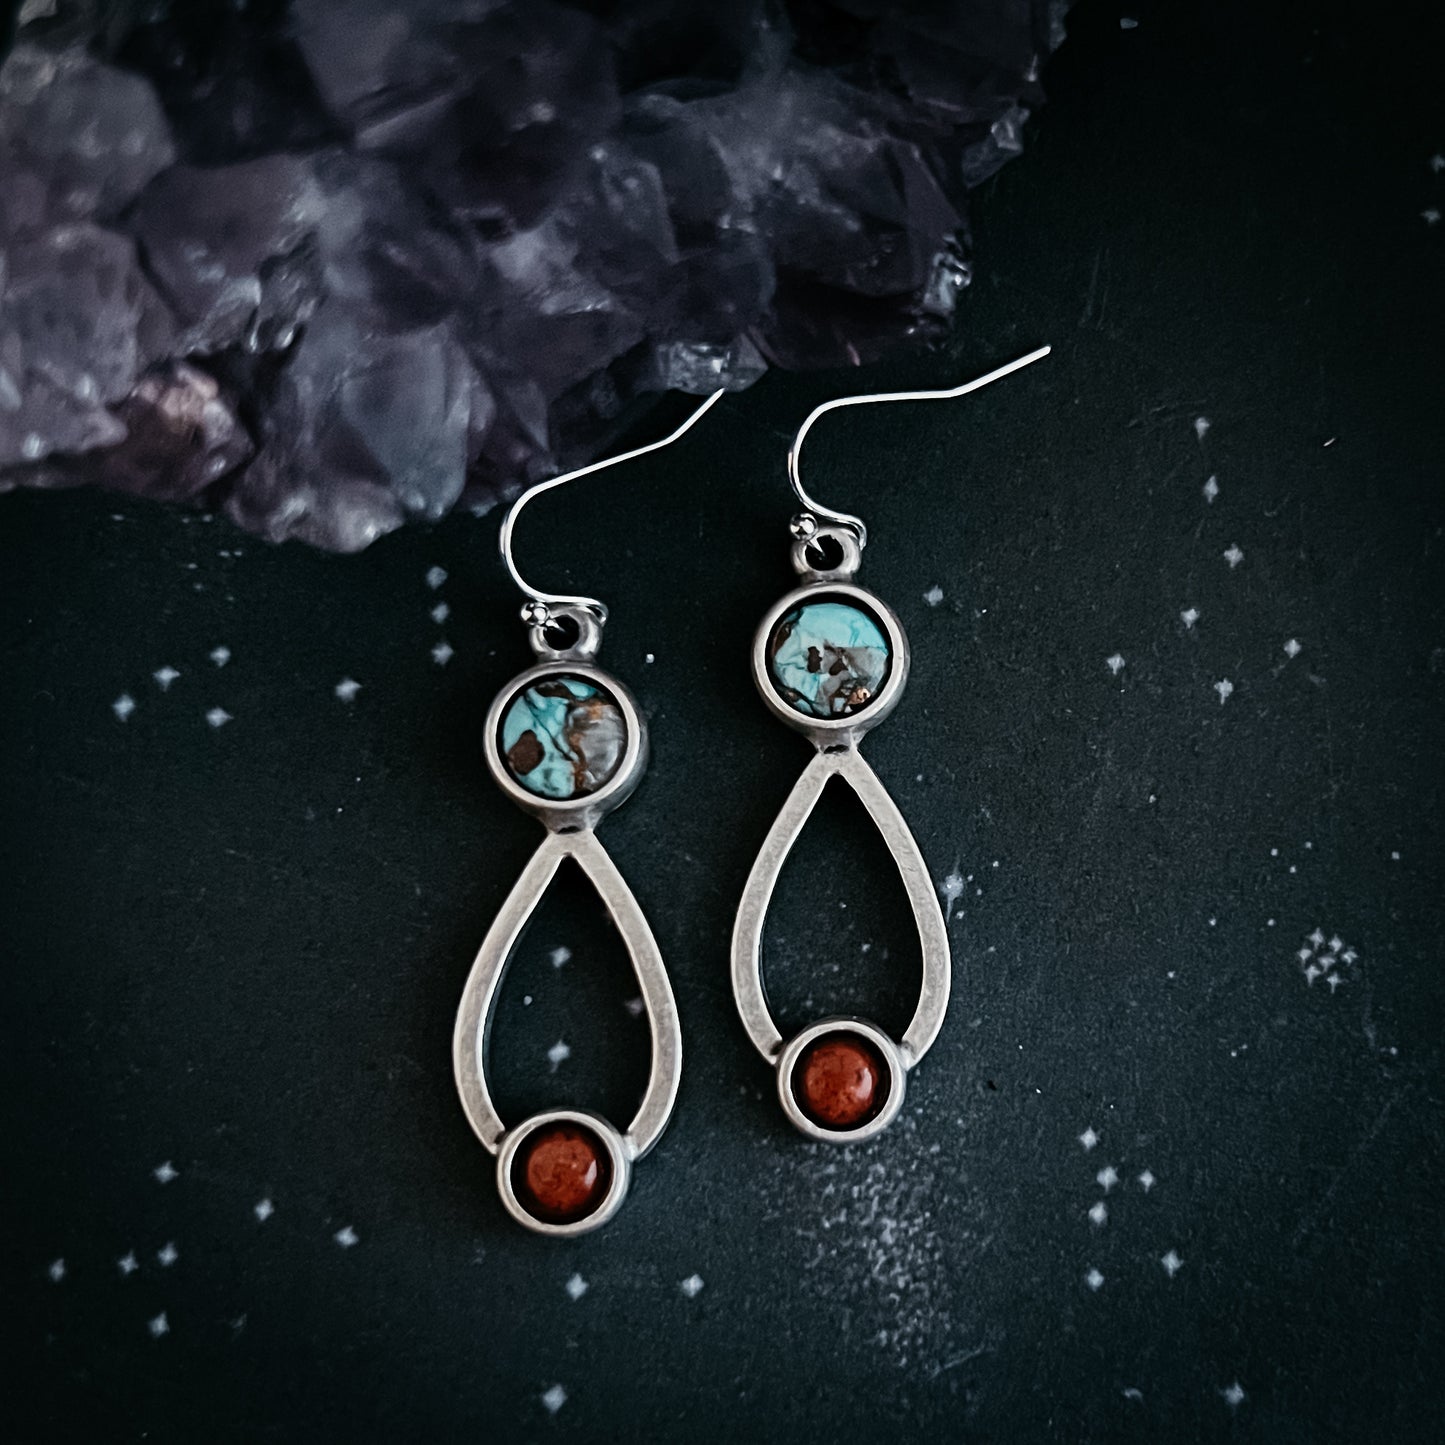 Journey to Mars Earrings - Copper Chrysocolla Earth and Red Jasper Moon